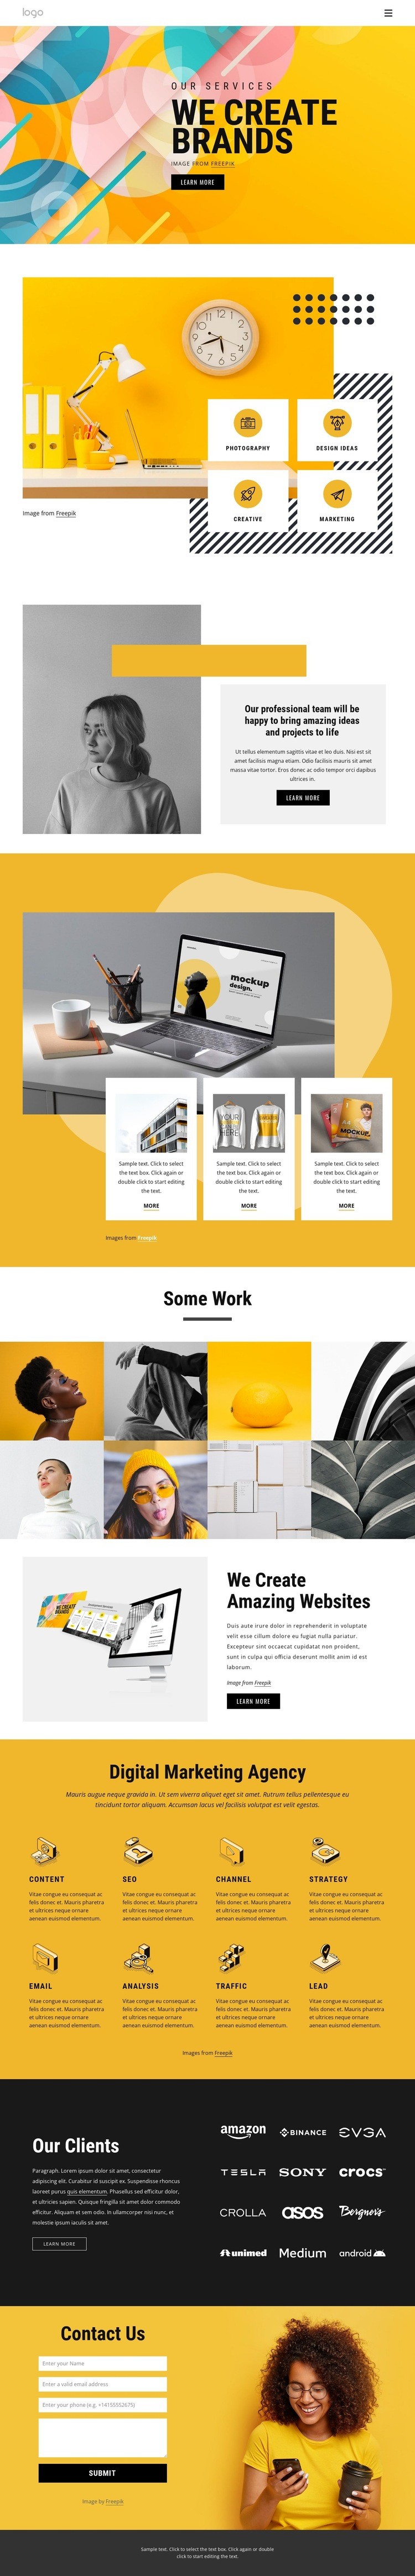 11+ Years branding experience Web Page Design